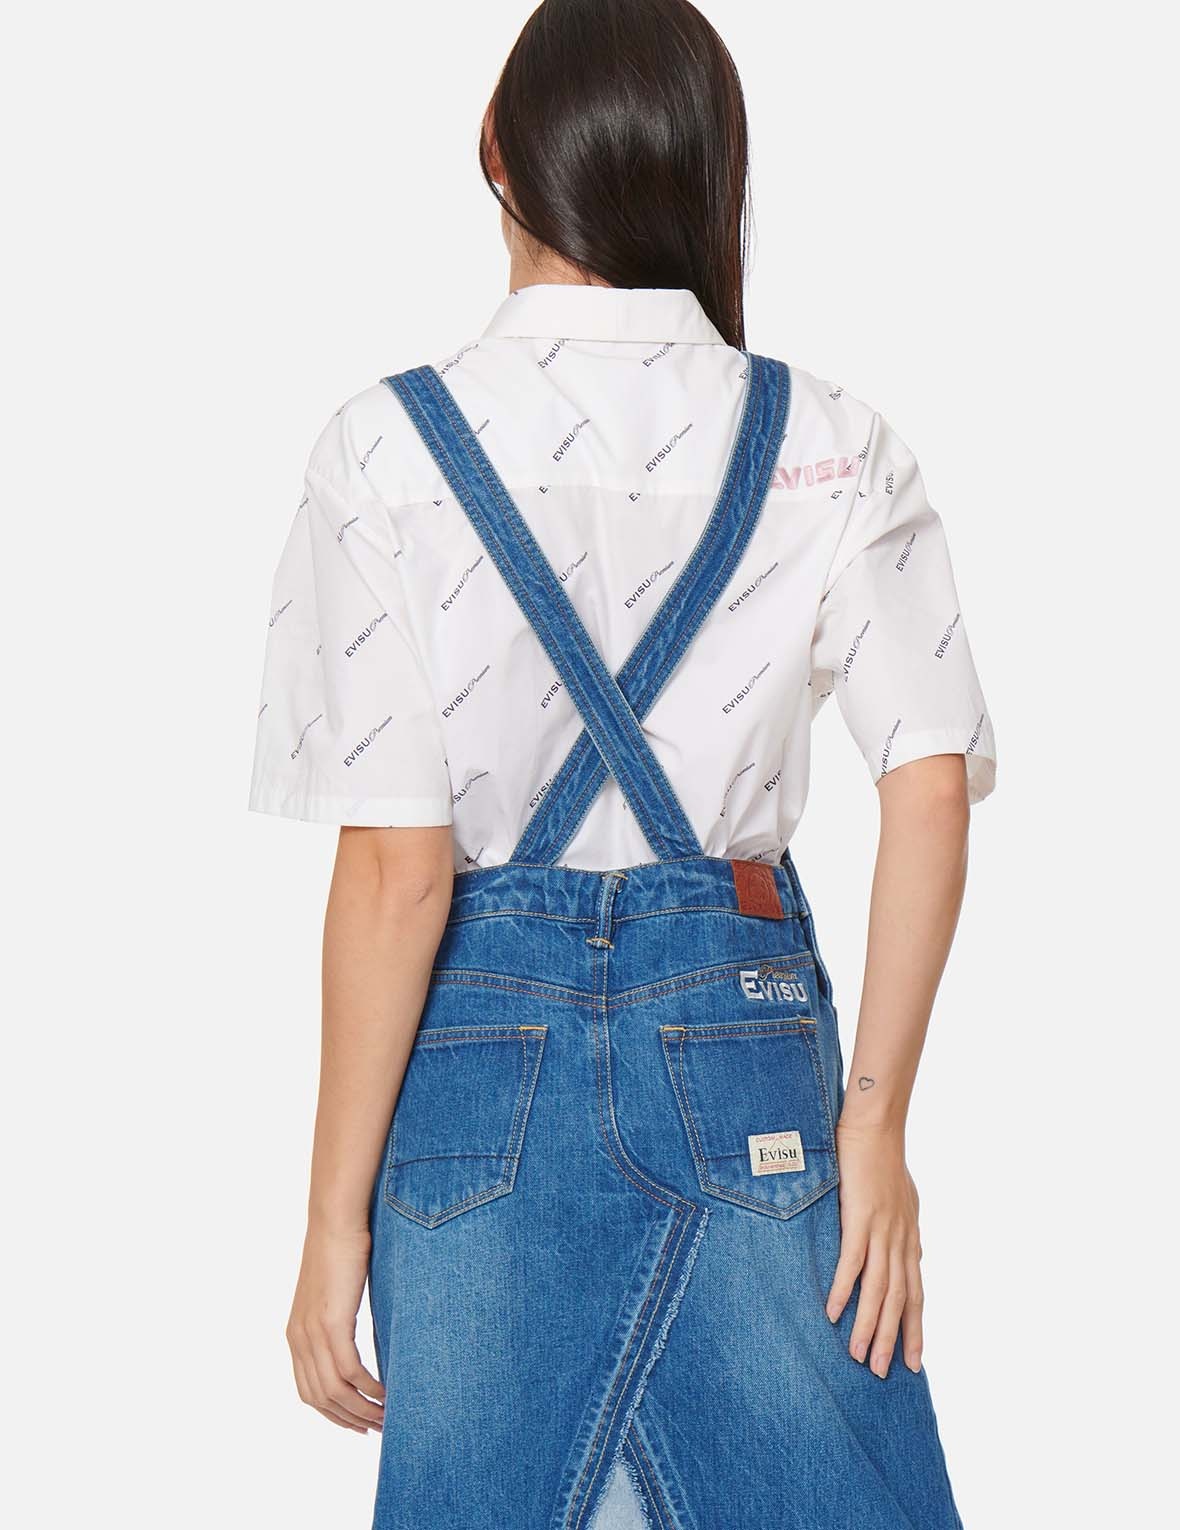 SEAGULL EMBROIDERED DENIM DUNGAREE DRESS - 4